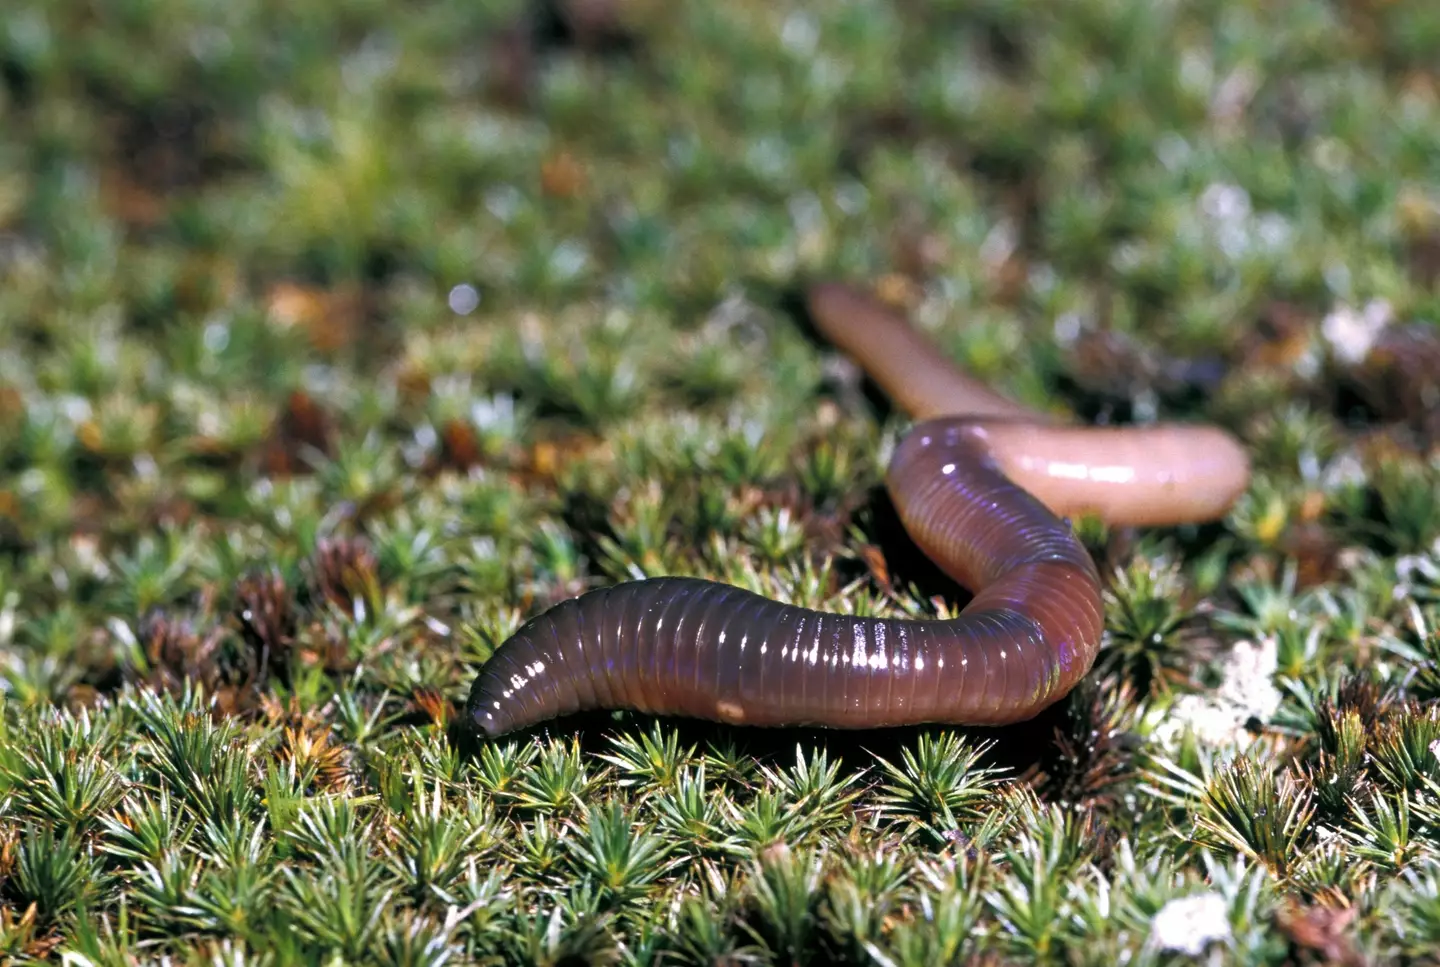 Worms could be the answer to immortality (Ed Reschke/Getty)